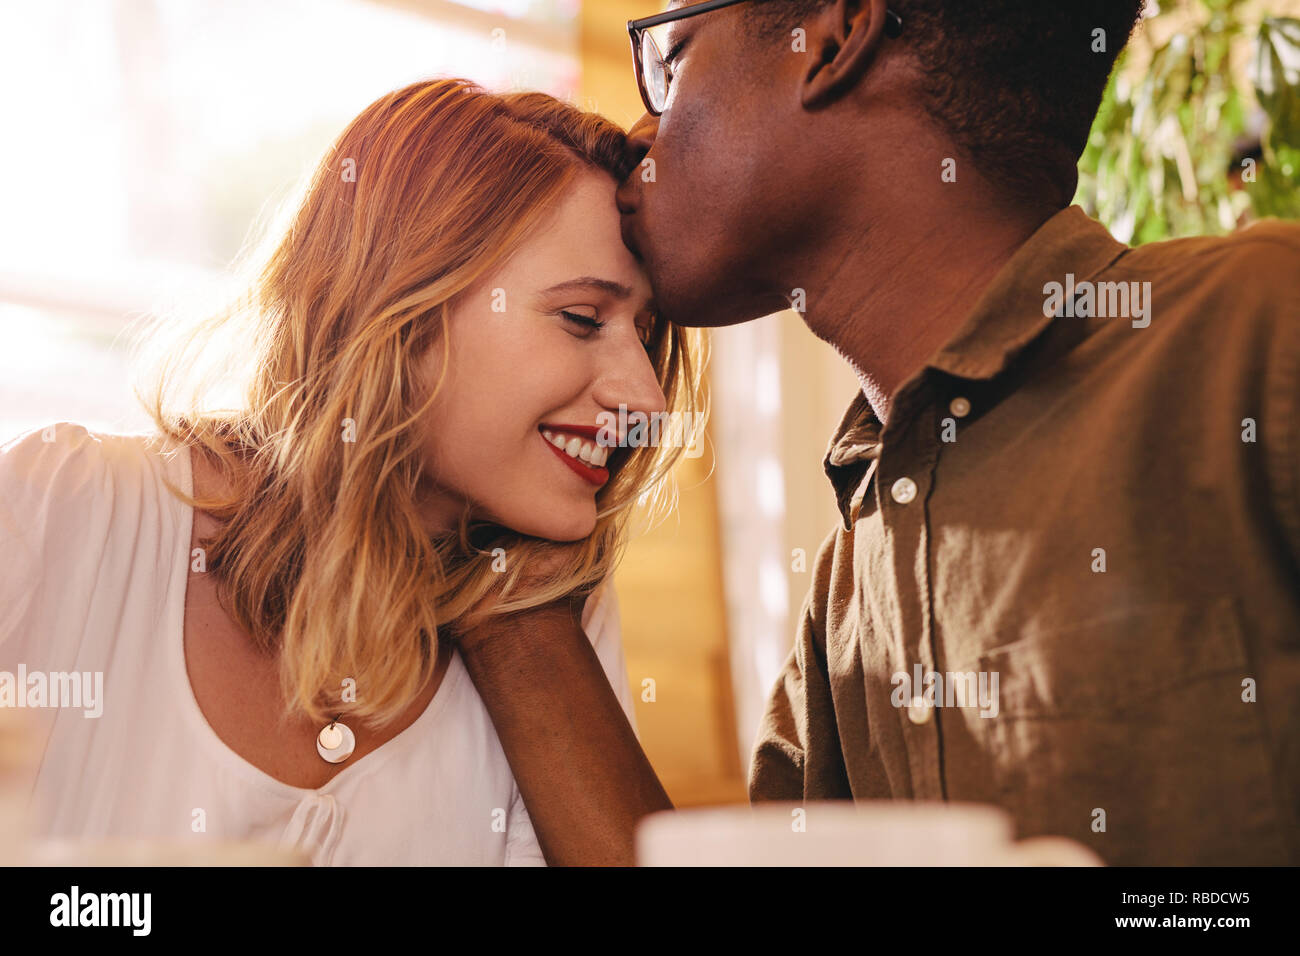 African man kissing forehead of his girlfriend. Loving interracial couple on date at coffee shop. Stock Photo